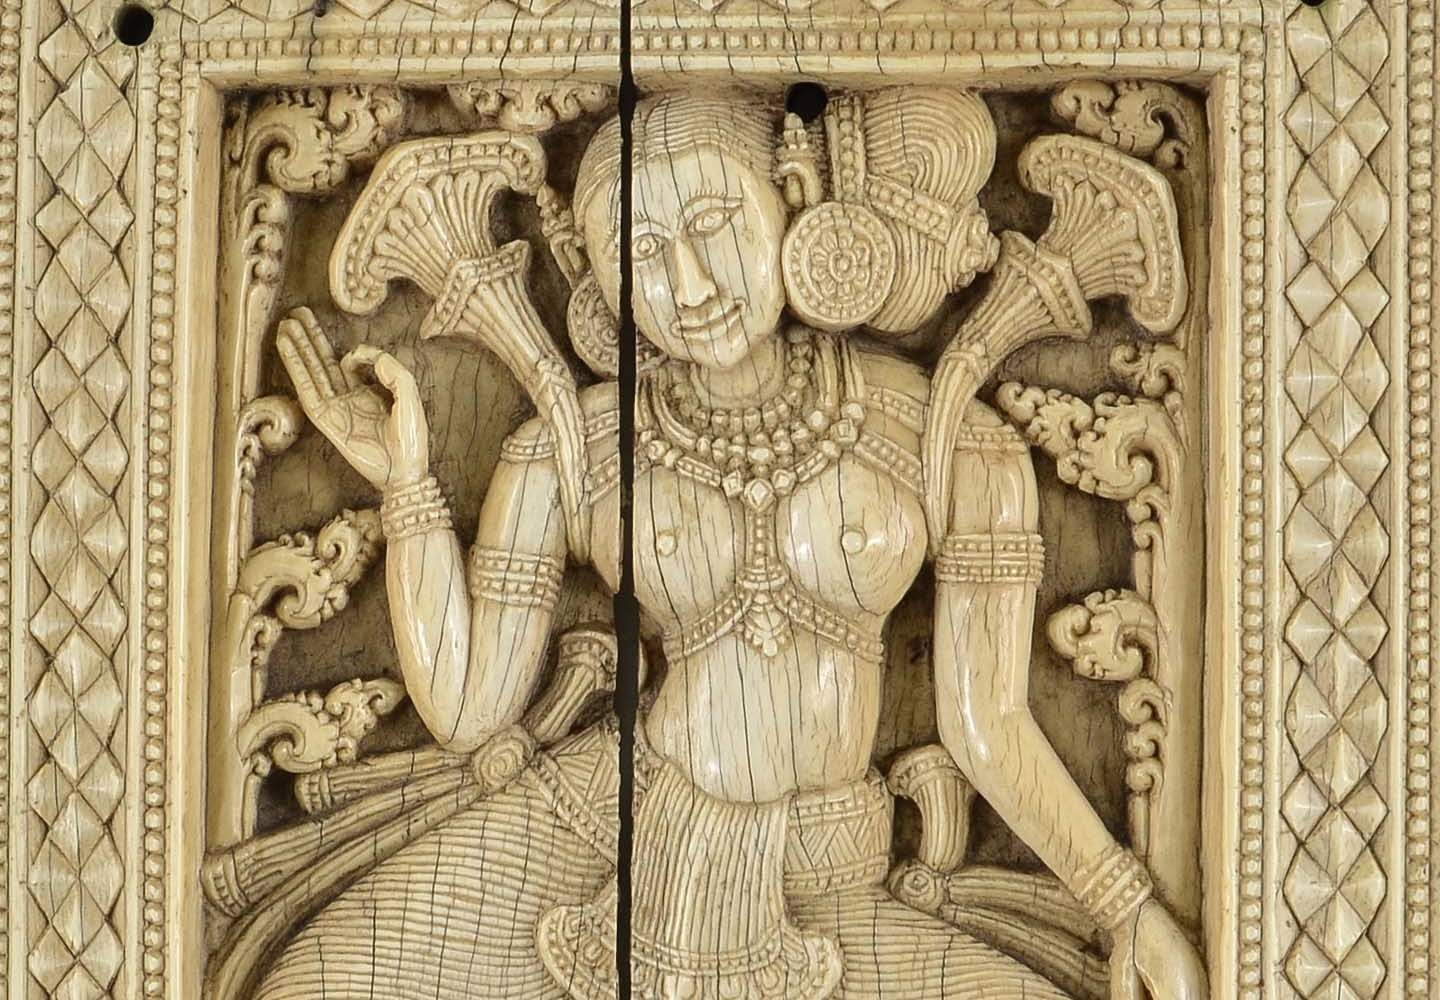 Annual Lecture on the Arts of South and Southeast Asia: Luxury Goods: Ivory and Temple Decor in 18th-Century Sri Lanka